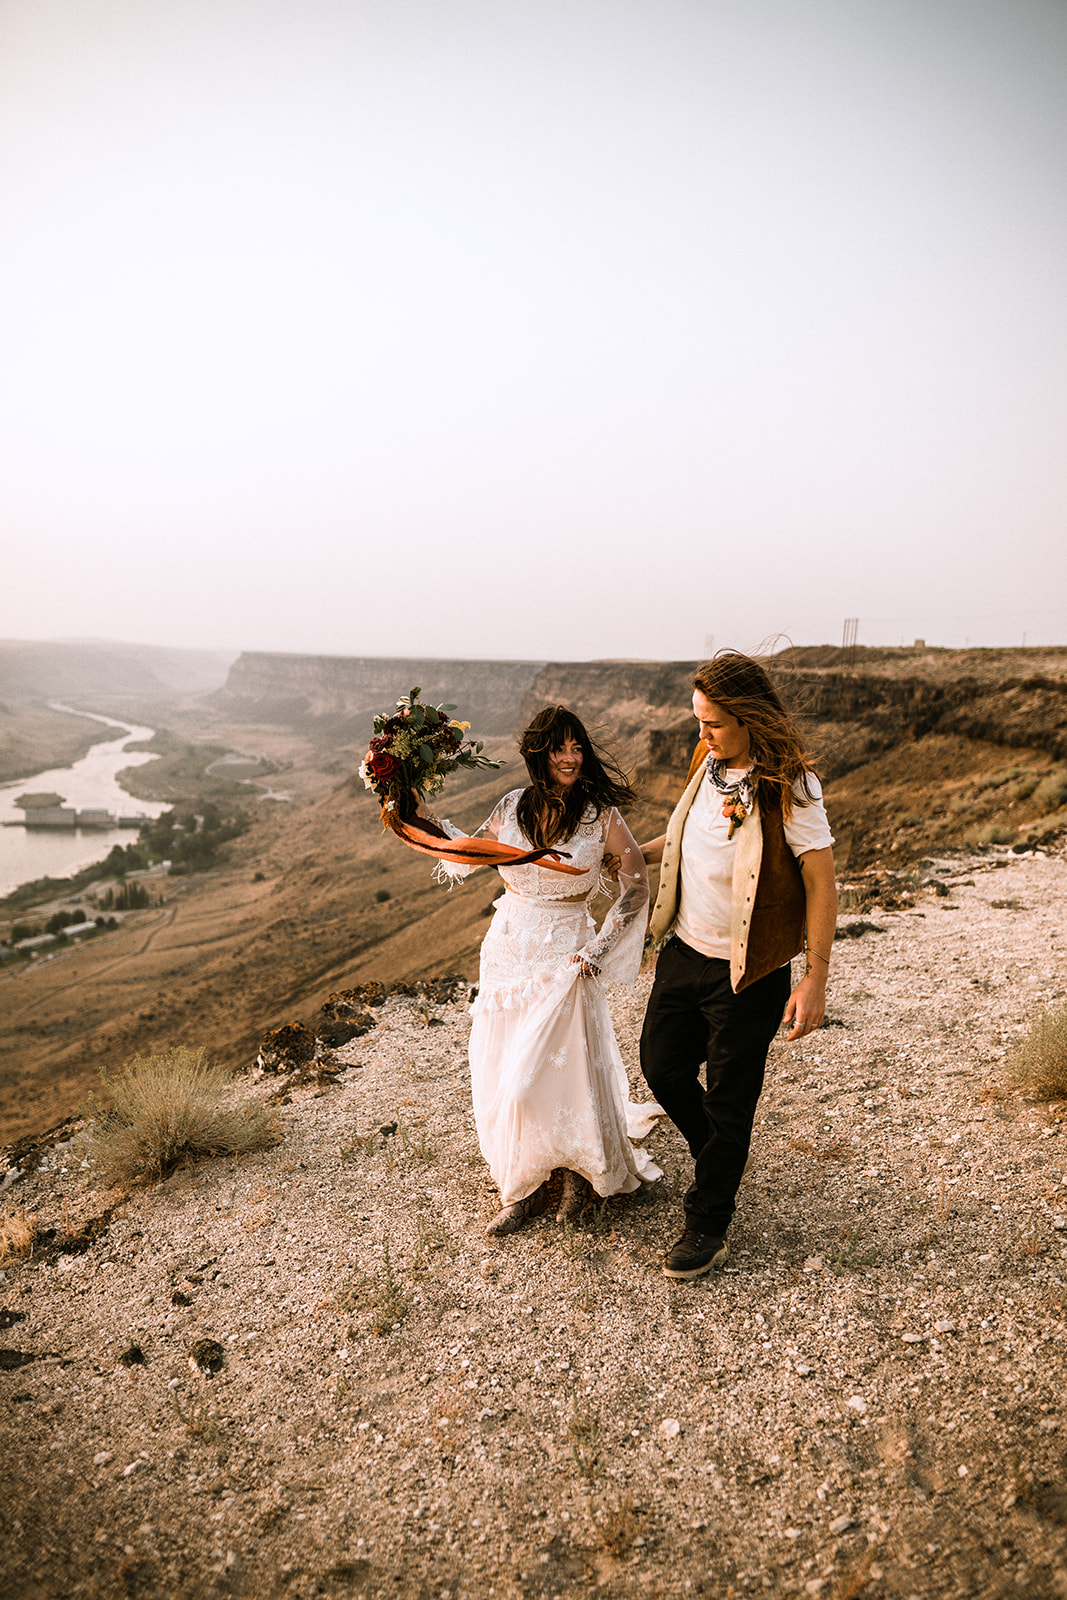 Brides walk together along the edge of the snake river canyon holding a bouquet